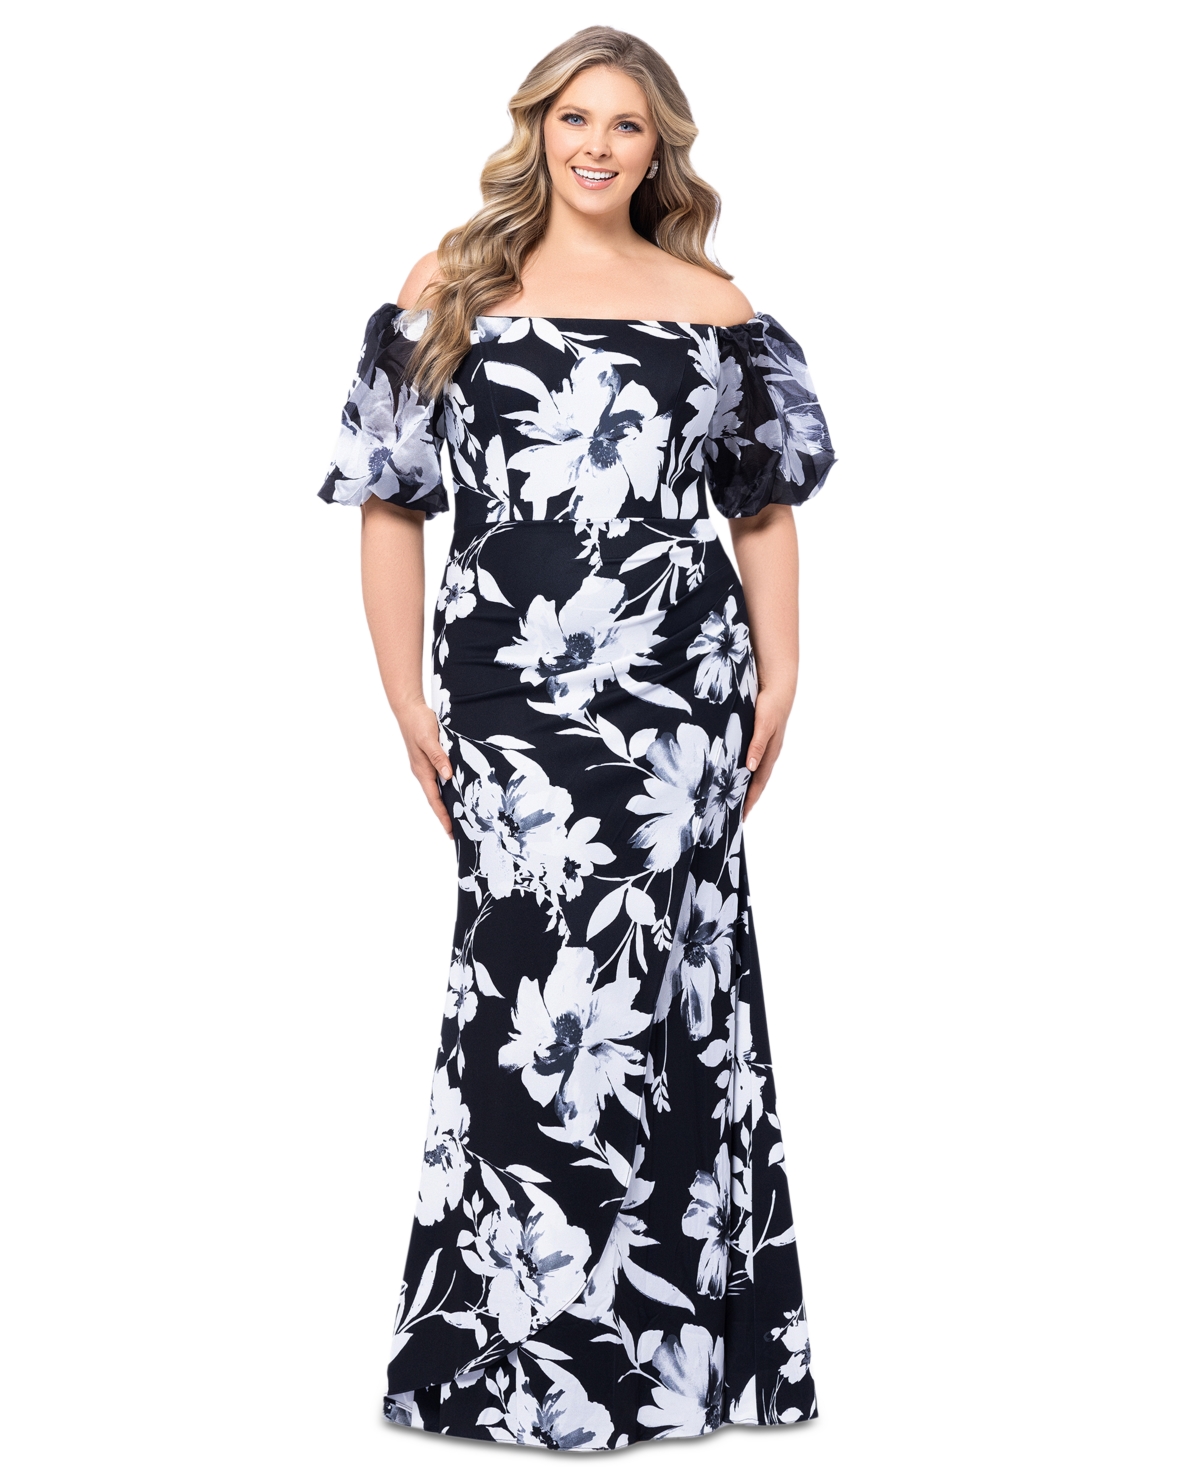 Plus Size Floral Balloon-Sleeve Off-The-Shoulder Gown - Black/White